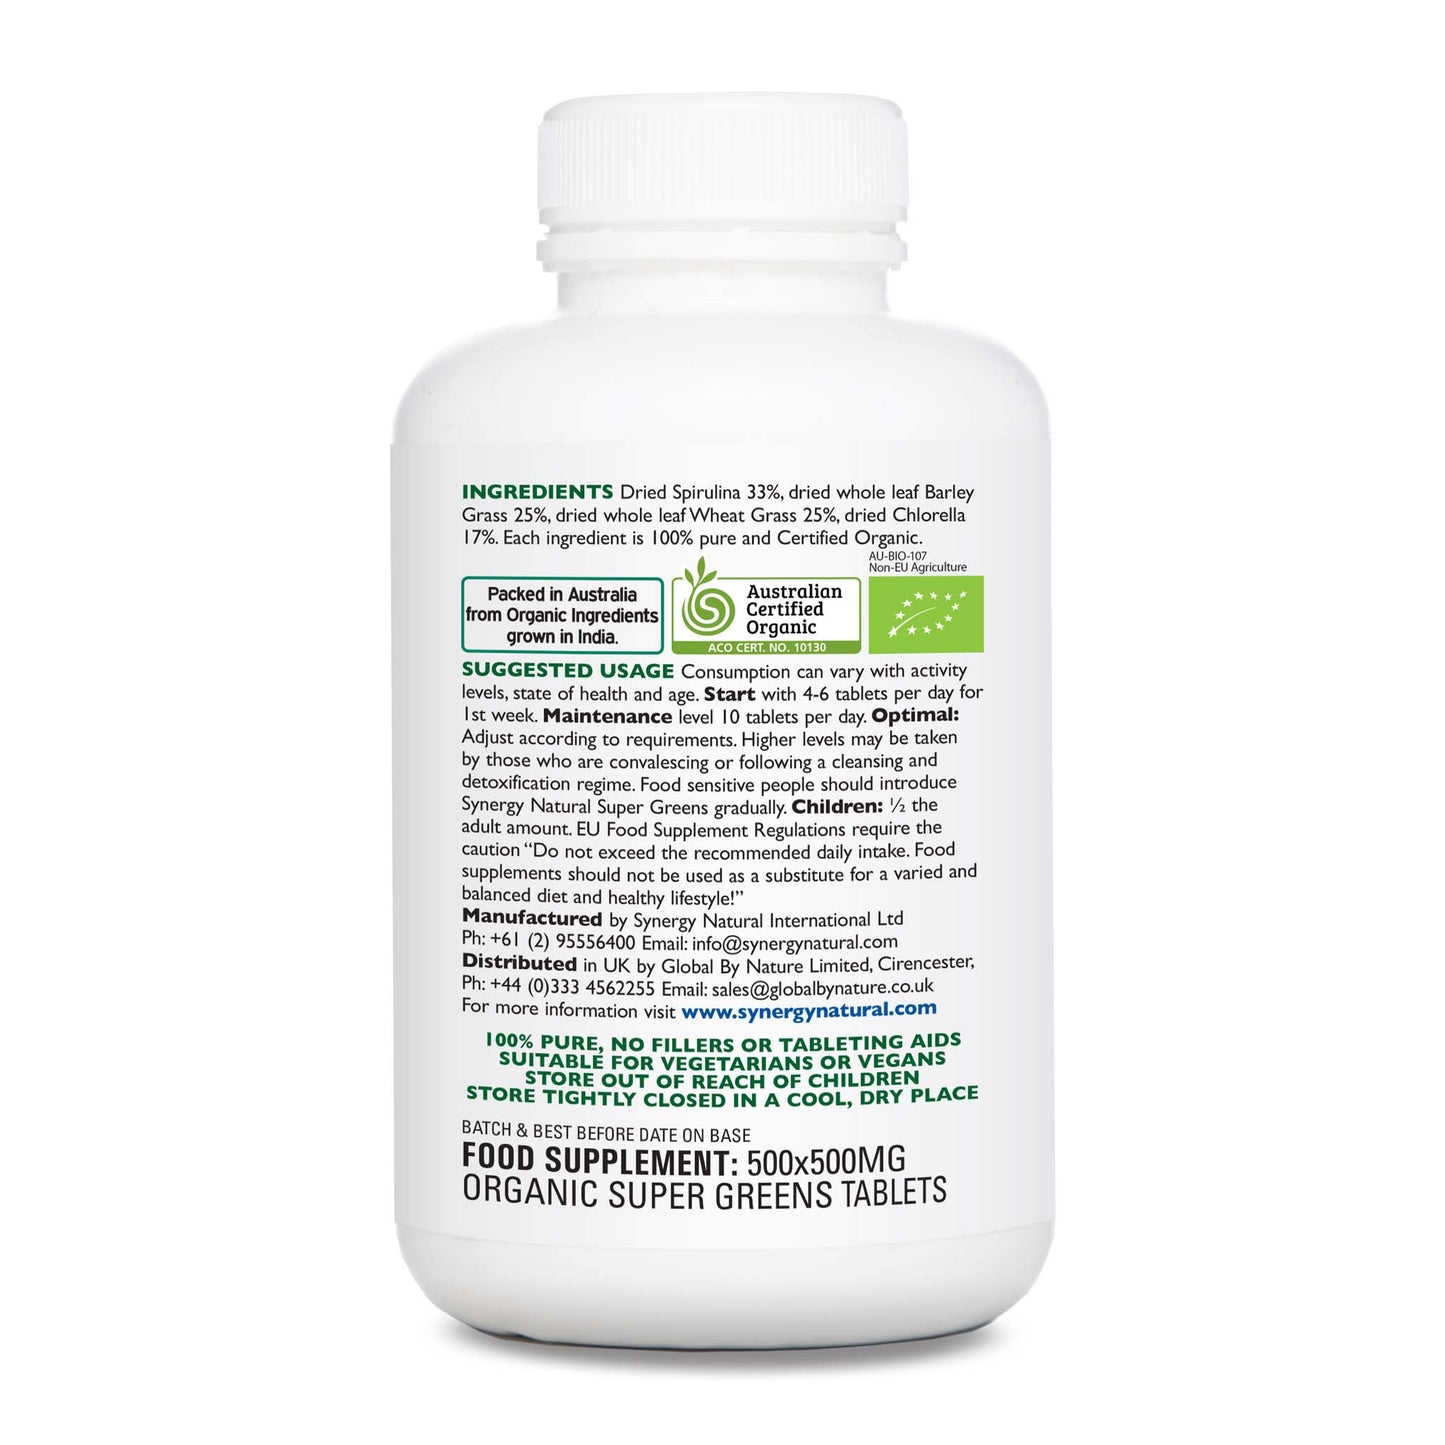 Synergy Natural Organic Super Greens 500 Tablets